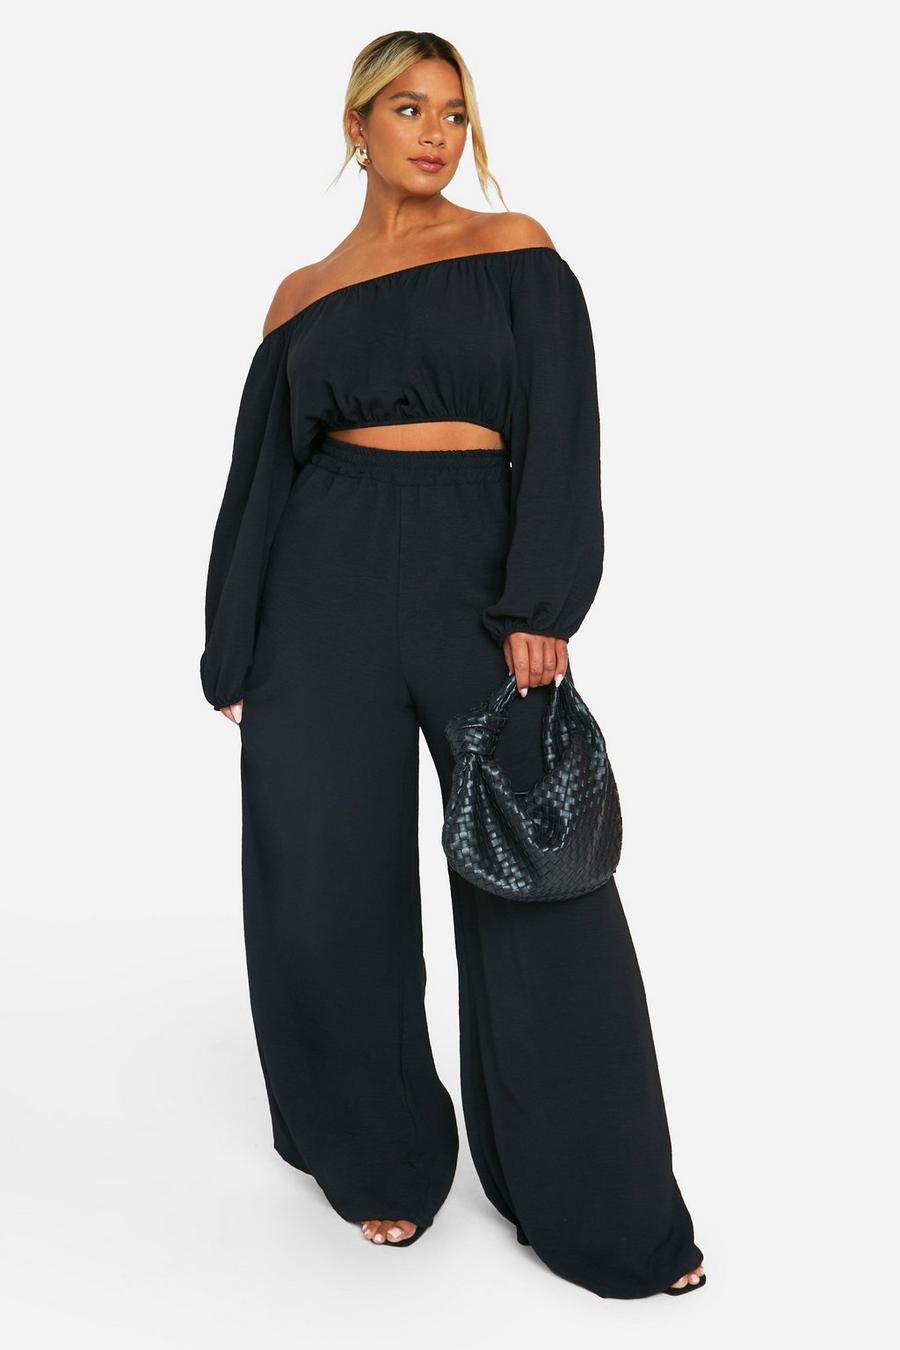 Black Plus Textured Off The Shoulder Top And Relaxed Fit Pants image number 1